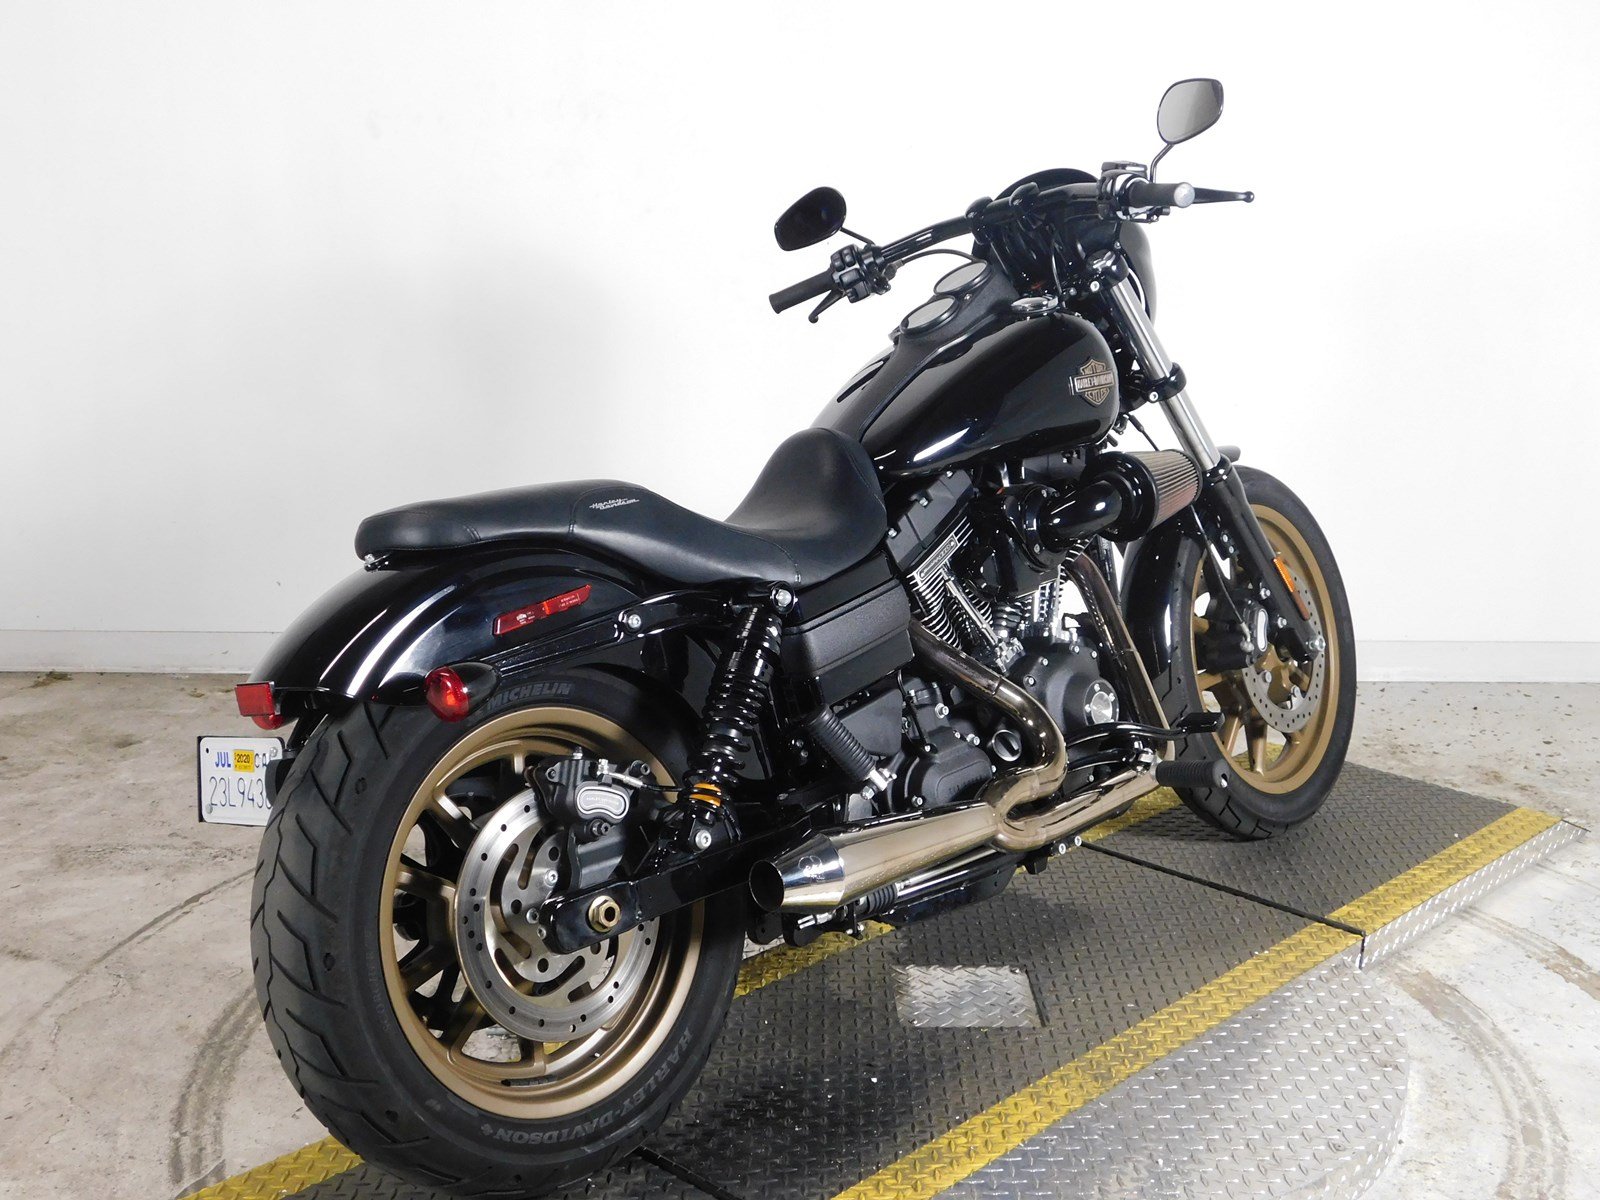 Pre-Owned 2017 Harley-Davidson Dyna Low Rider S FXDLS Dyna in ...